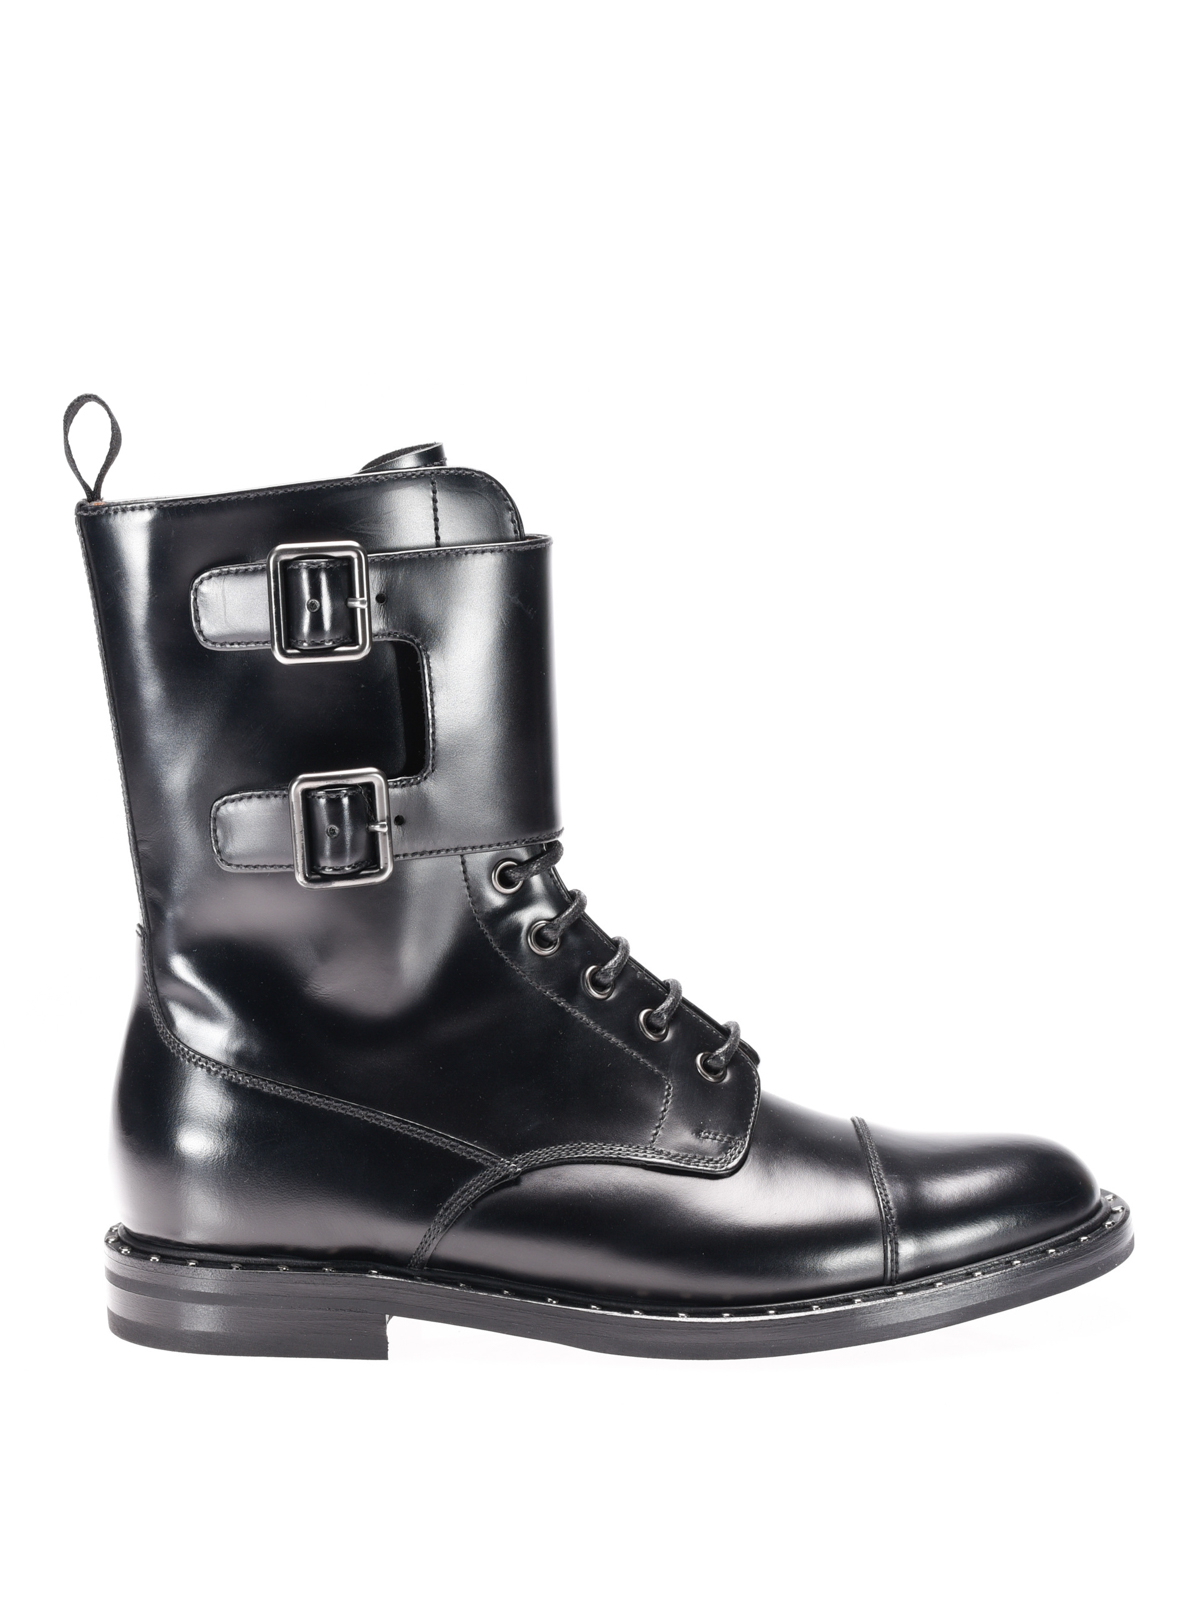 churchs-ankle-boots-smooth- ...